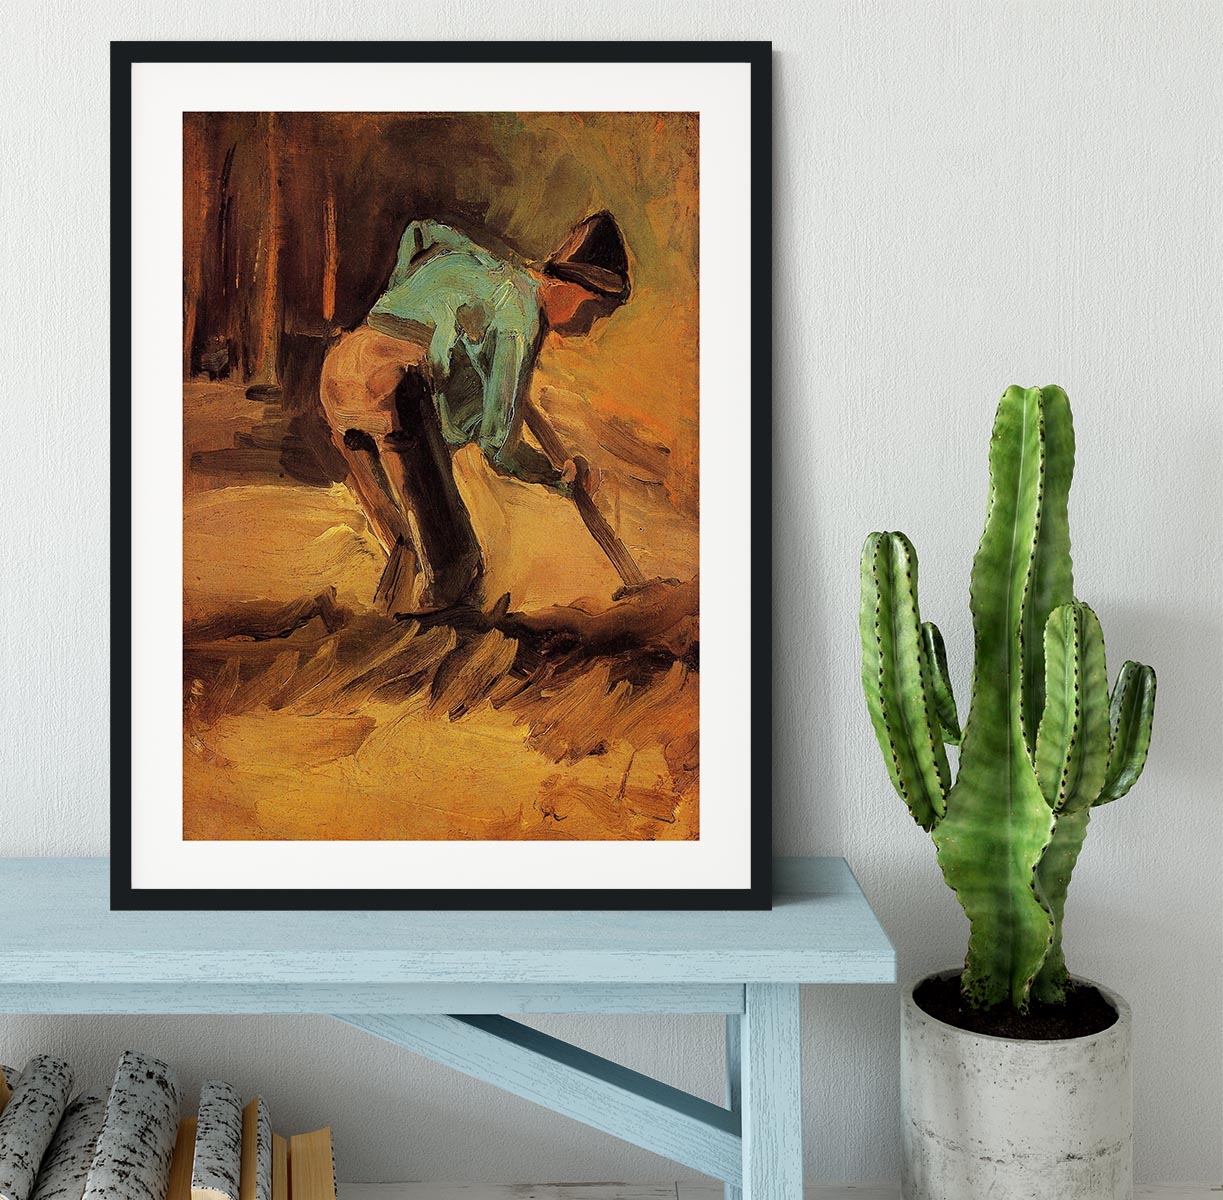 Man Stooping with Stick or Spade by Van Gogh Framed Print - Canvas Art Rocks - 1